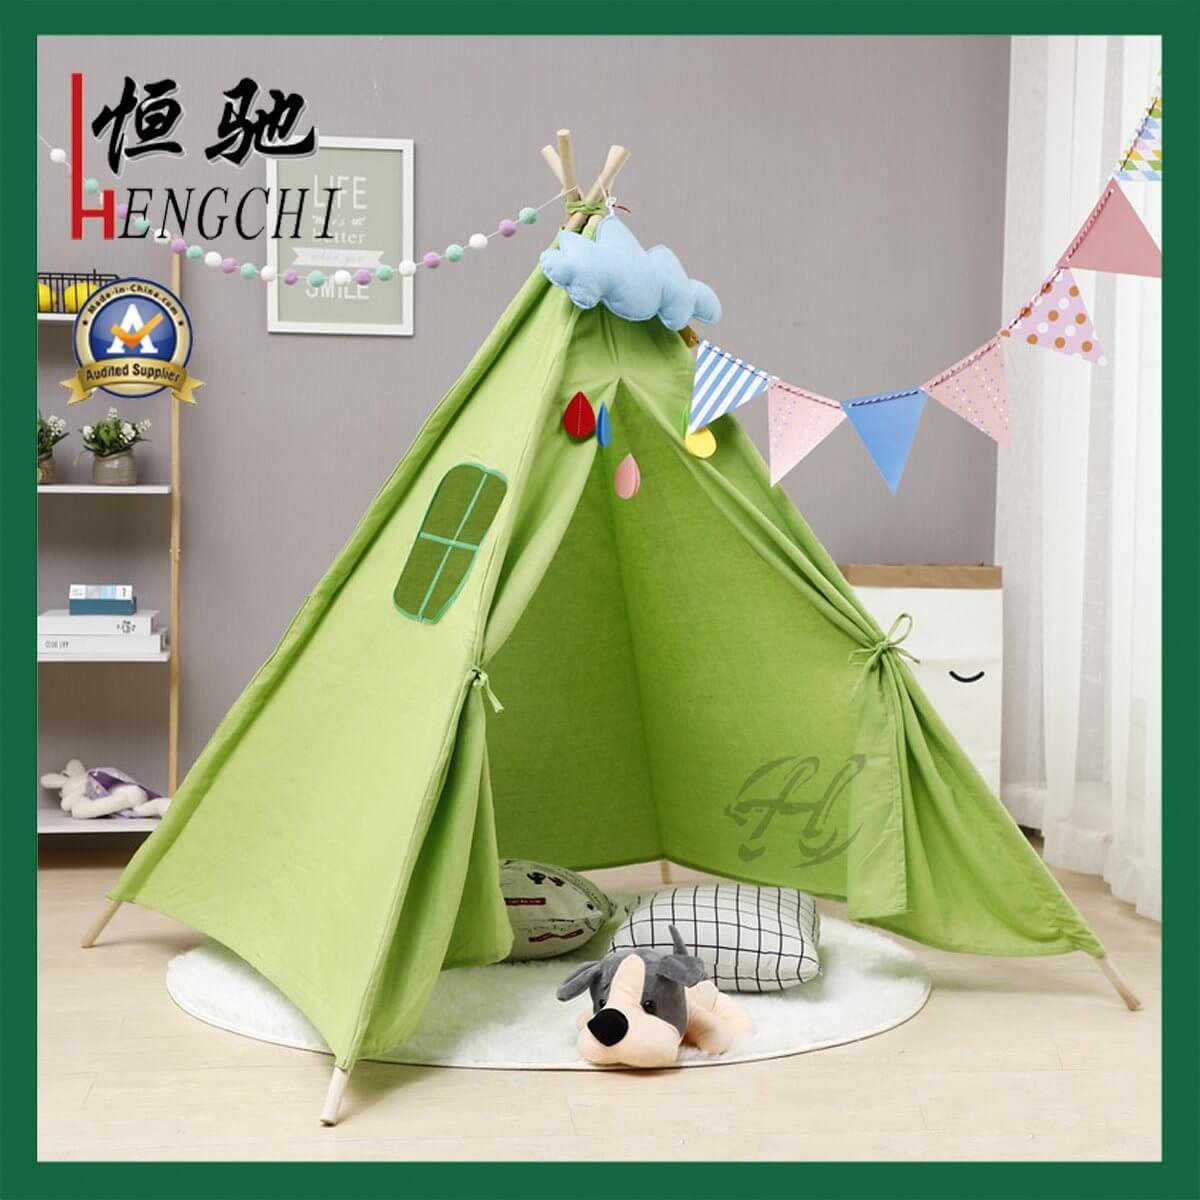 Kids-Indian-Teepee-Tent-Children-Play-Tent-Cotton-Canvas-Tent